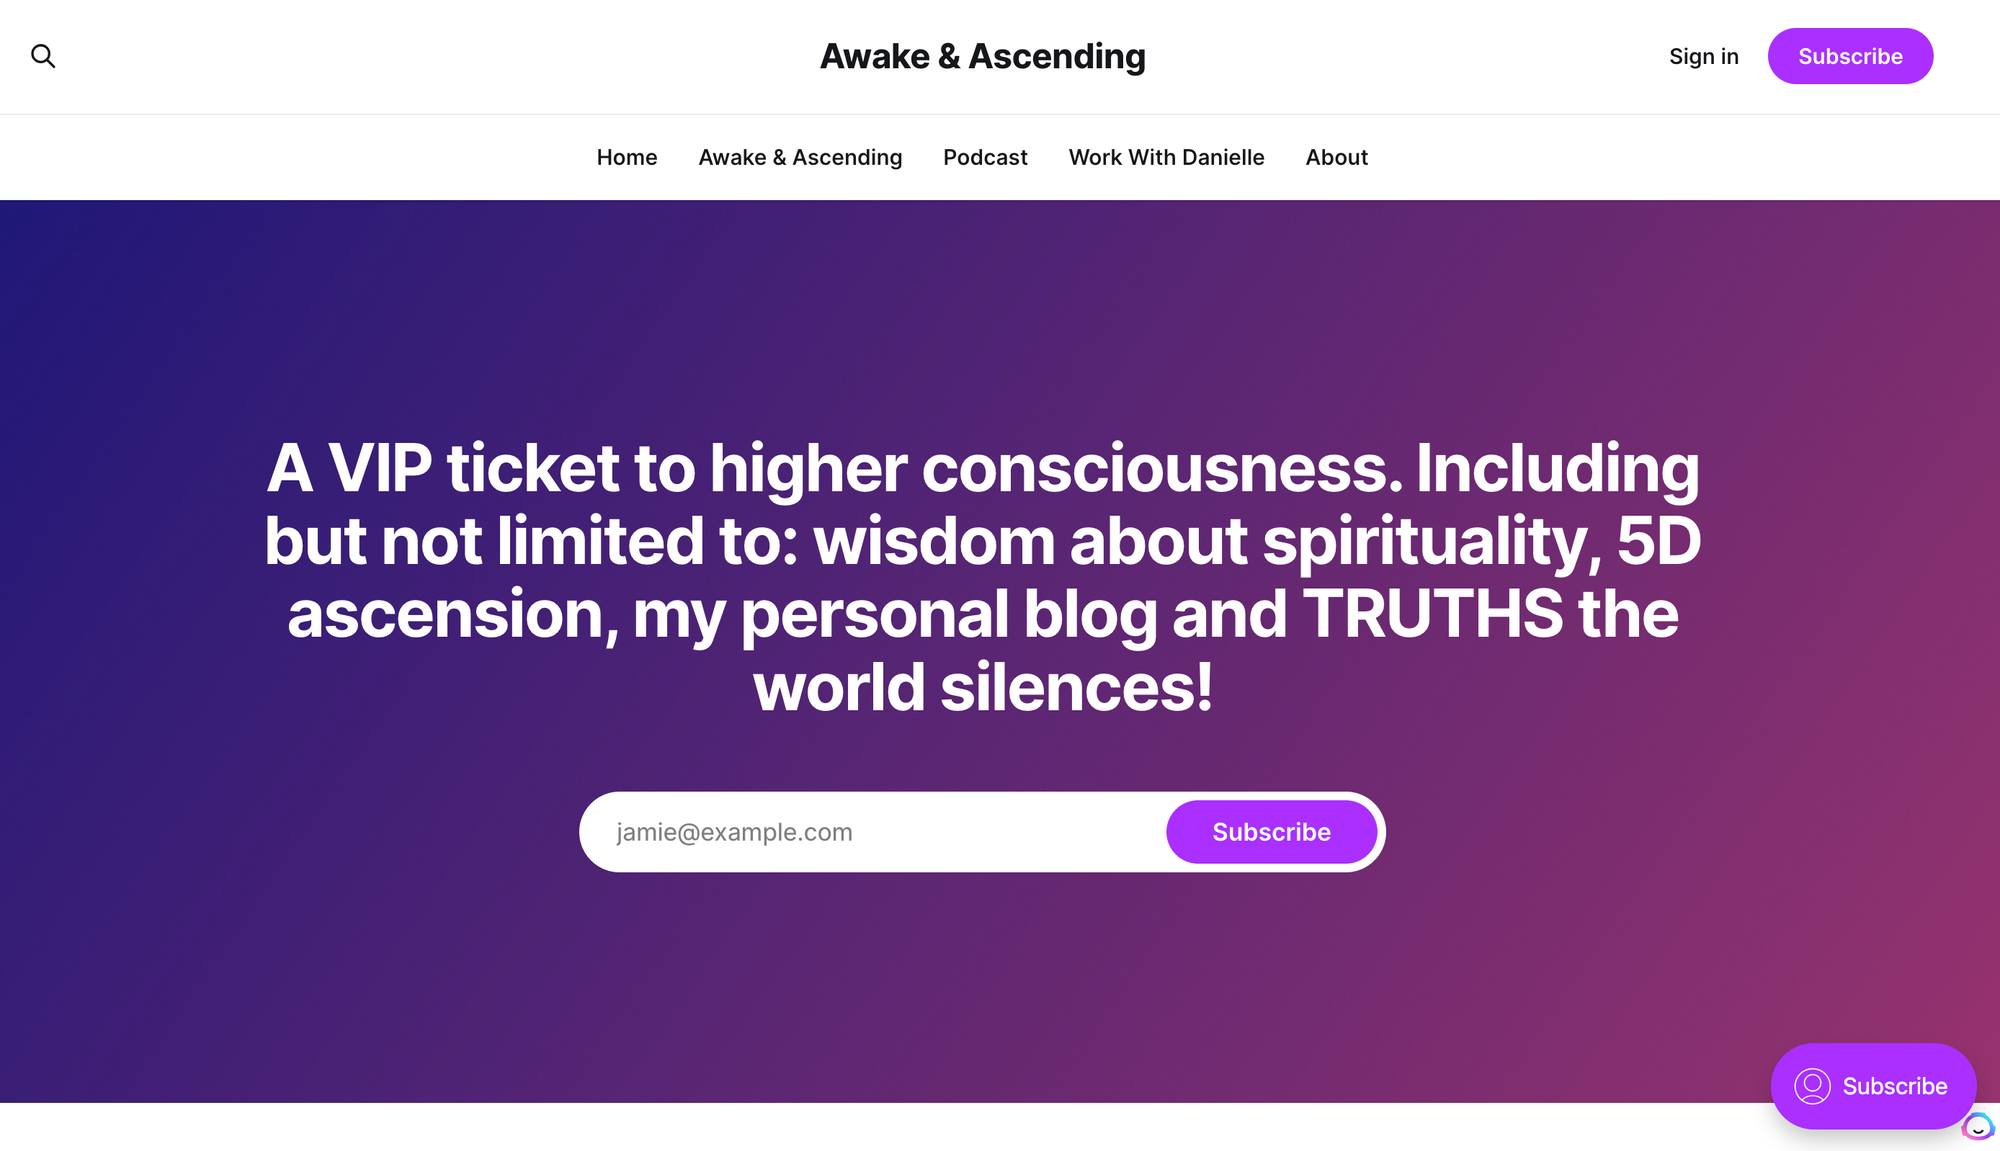 Awake & Ascending - Your VIP Ticket To Higher Consciousness!